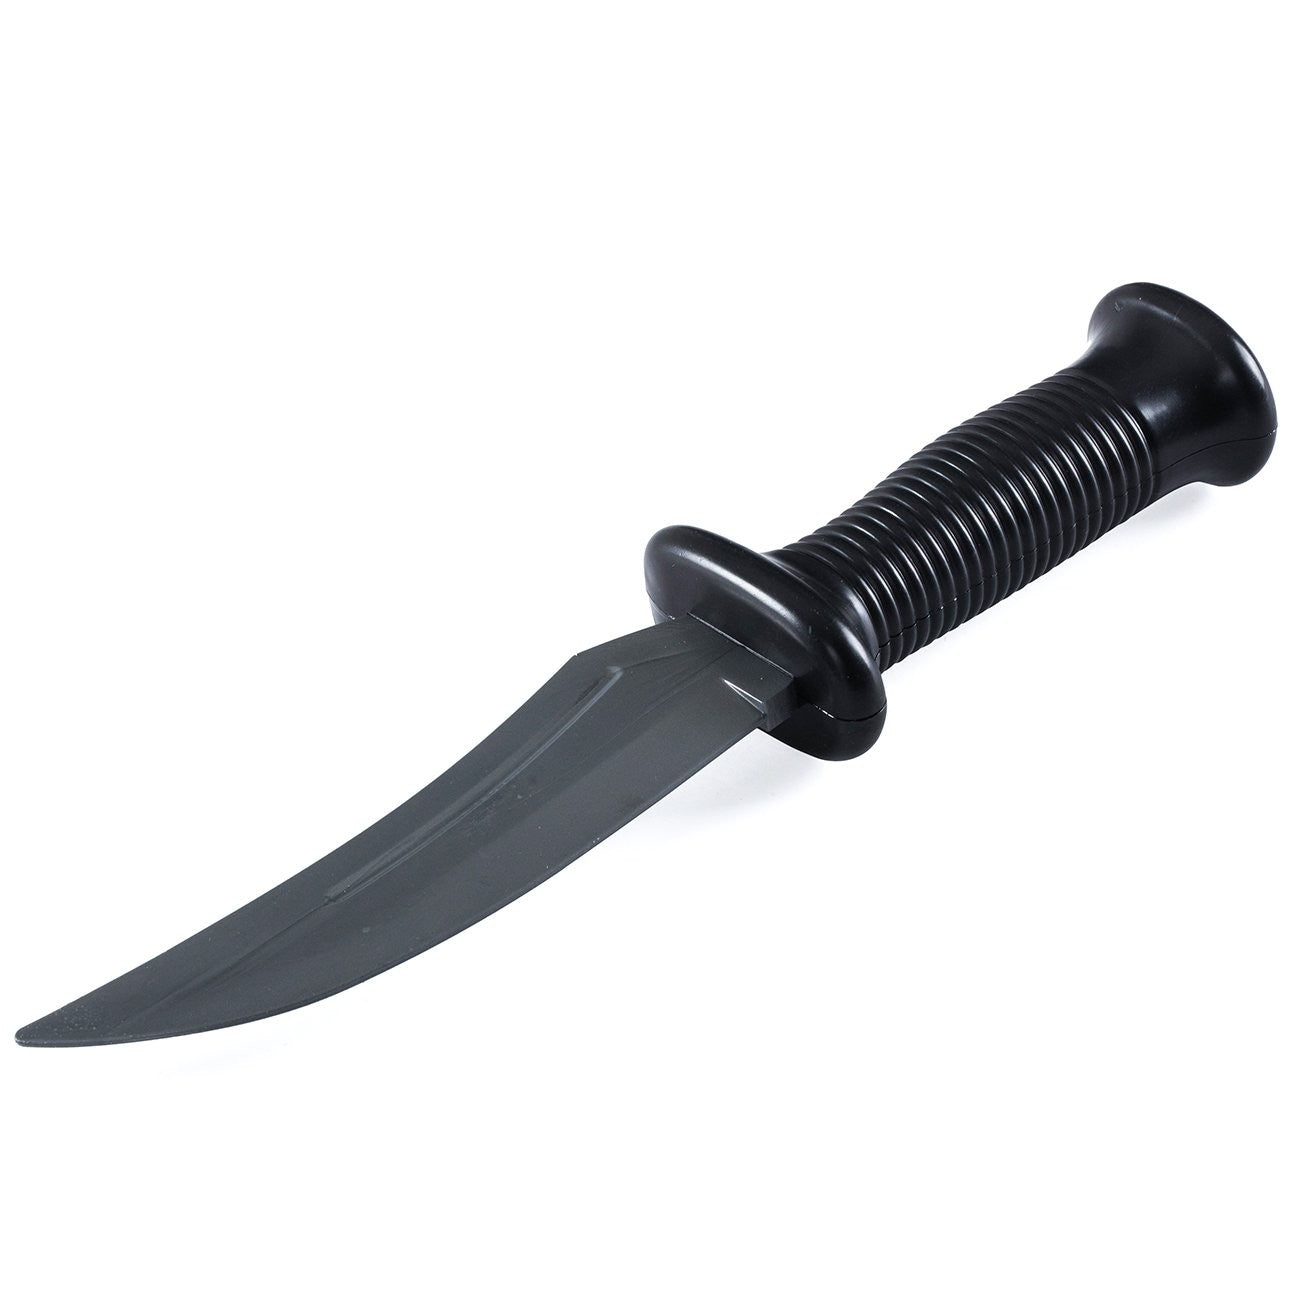 Fake Rubber Knife Halloween Weapon